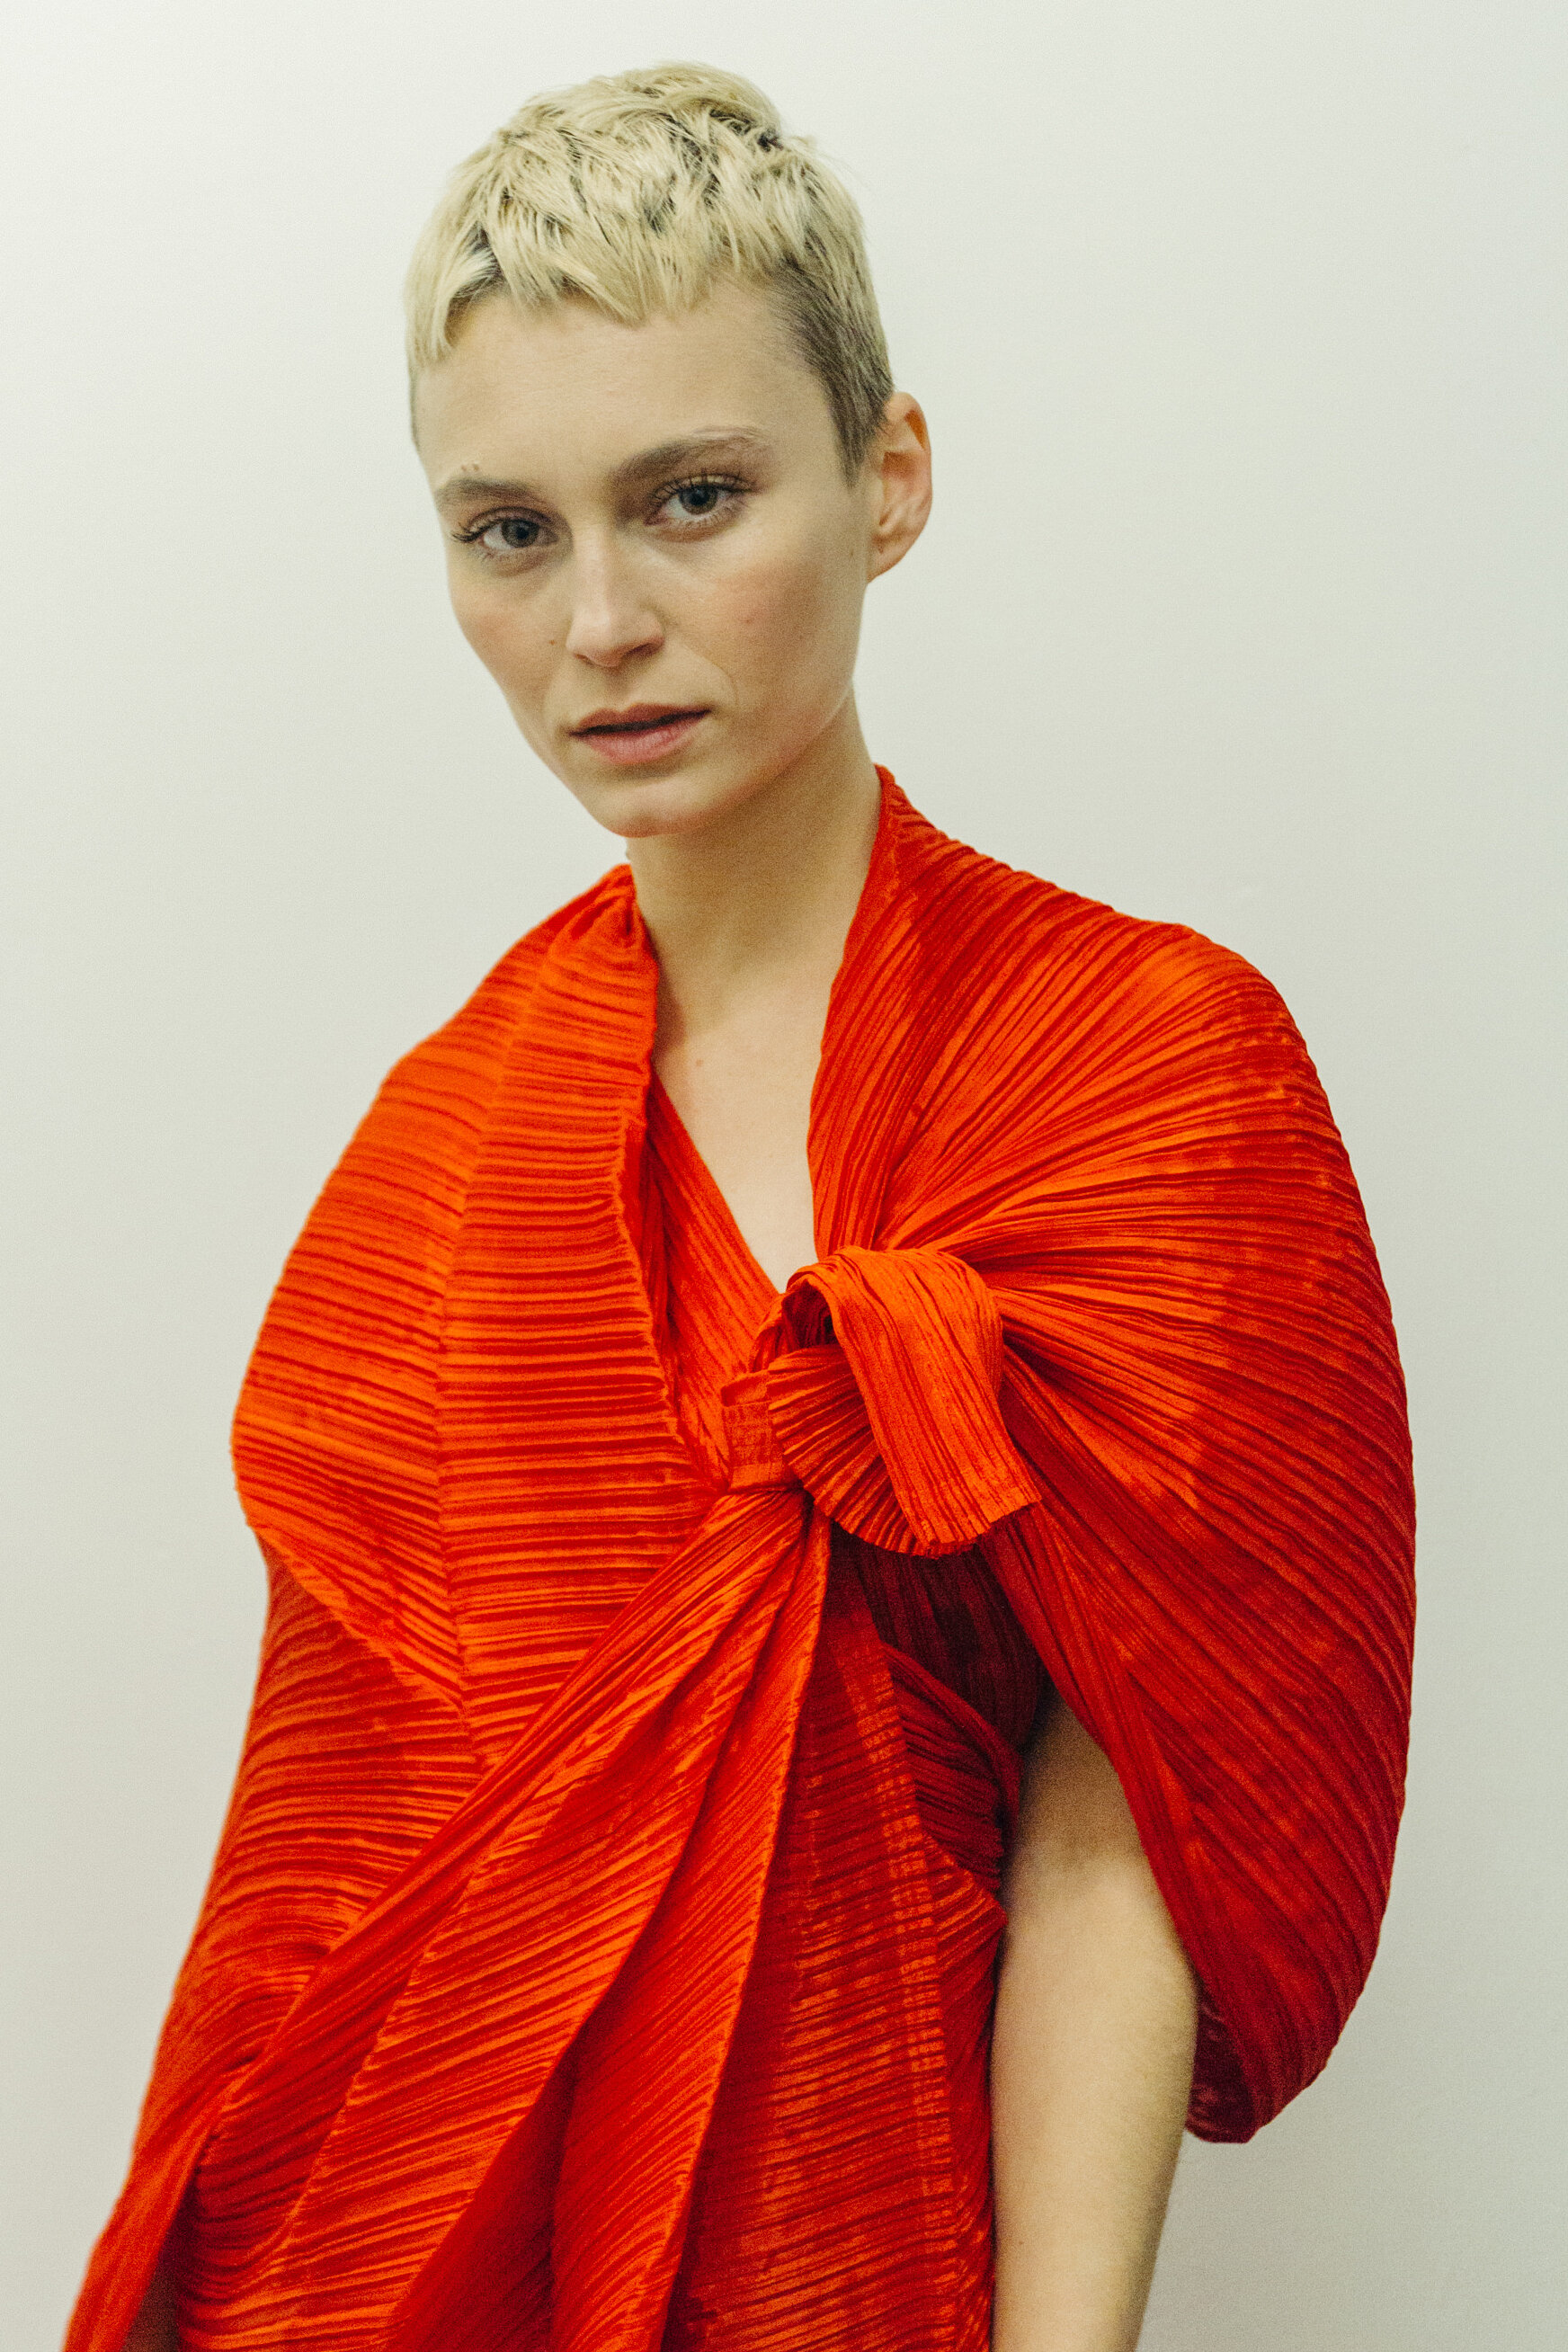 Short haired blonde woman wears a red pleated wrap dress by designer Issey Miyake